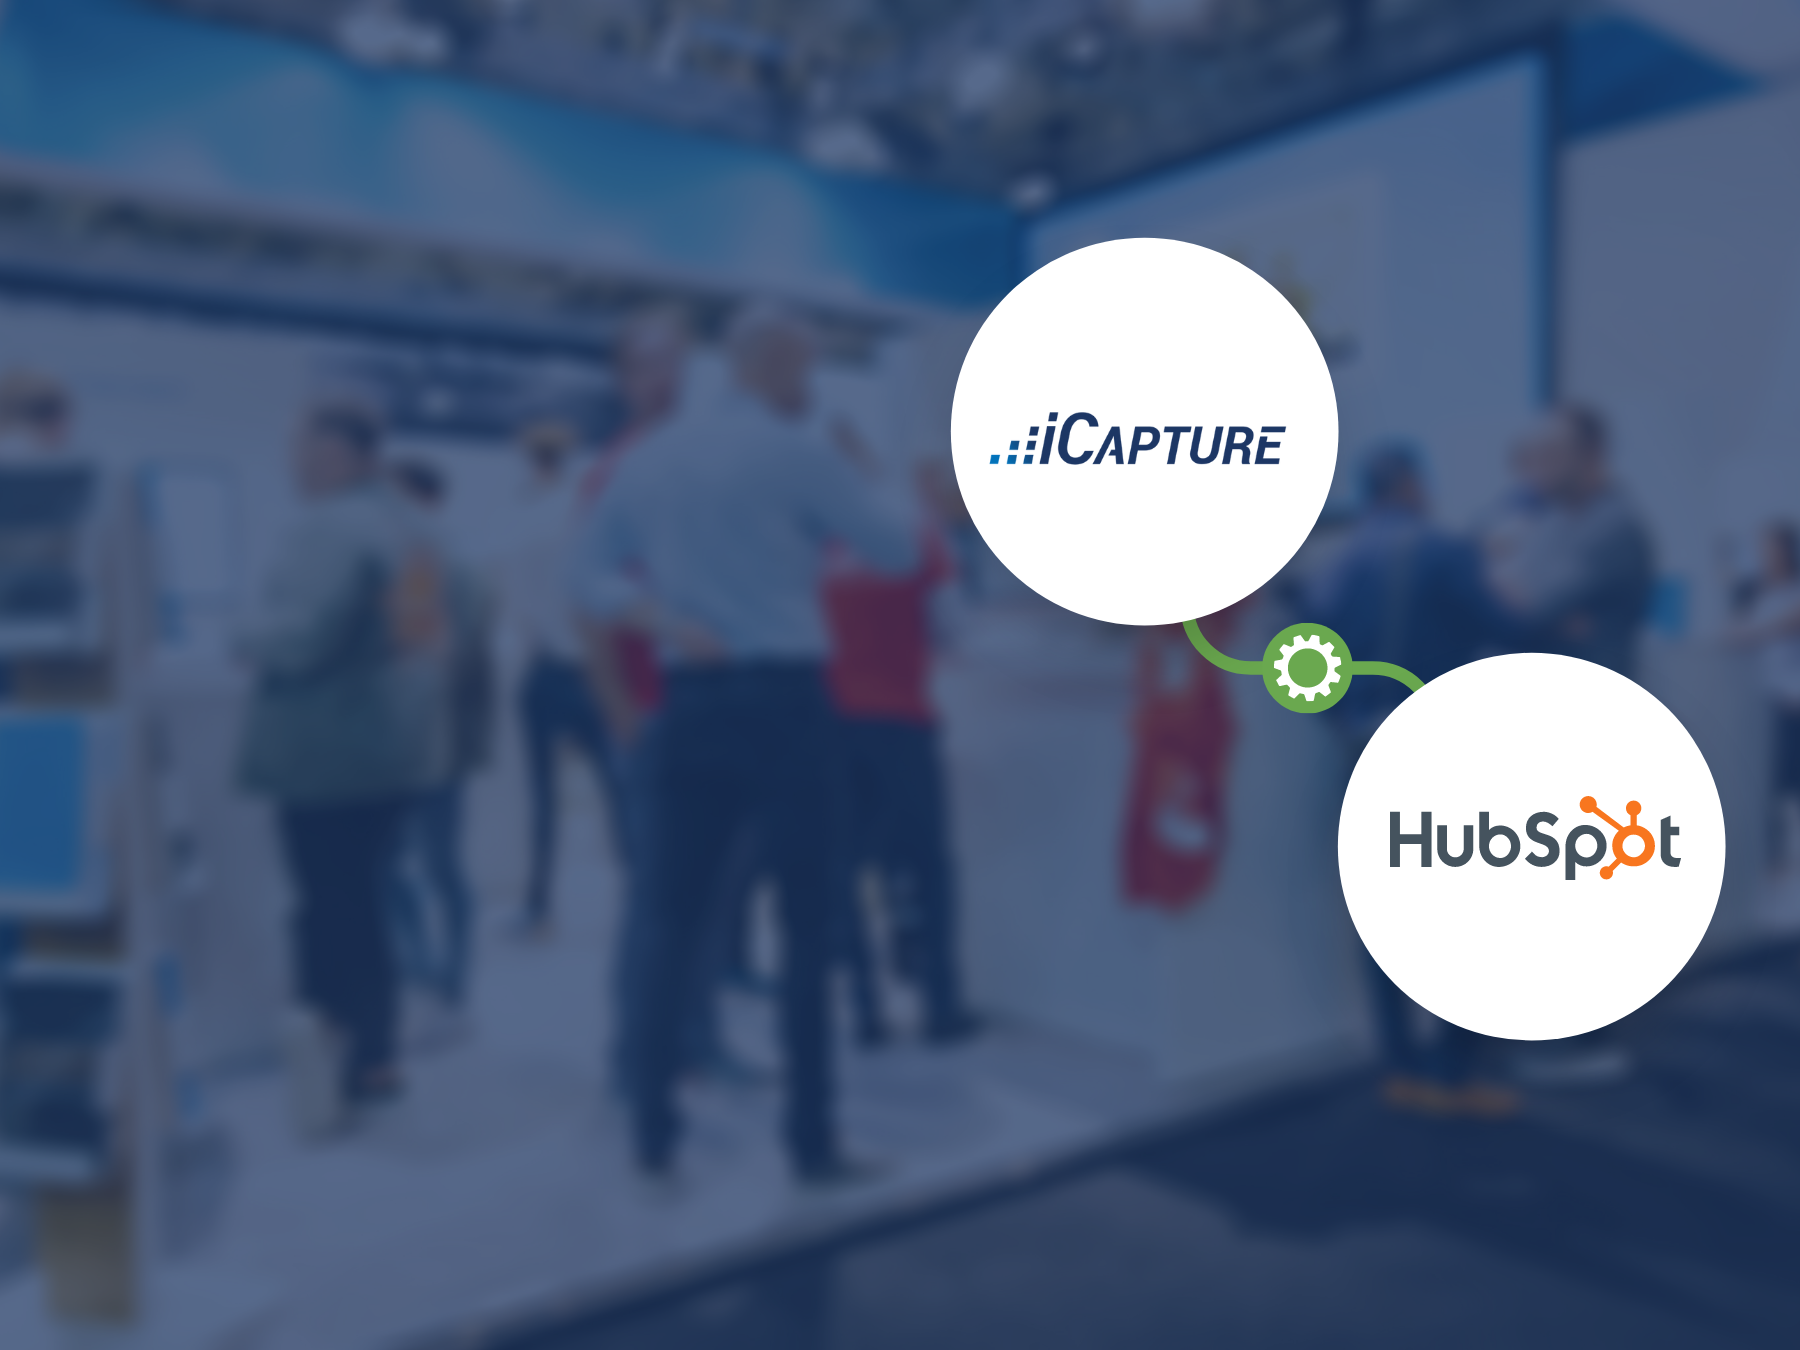 3 Ways to Use the iCapture Integration with HubSpot to Maximize ROI from Events